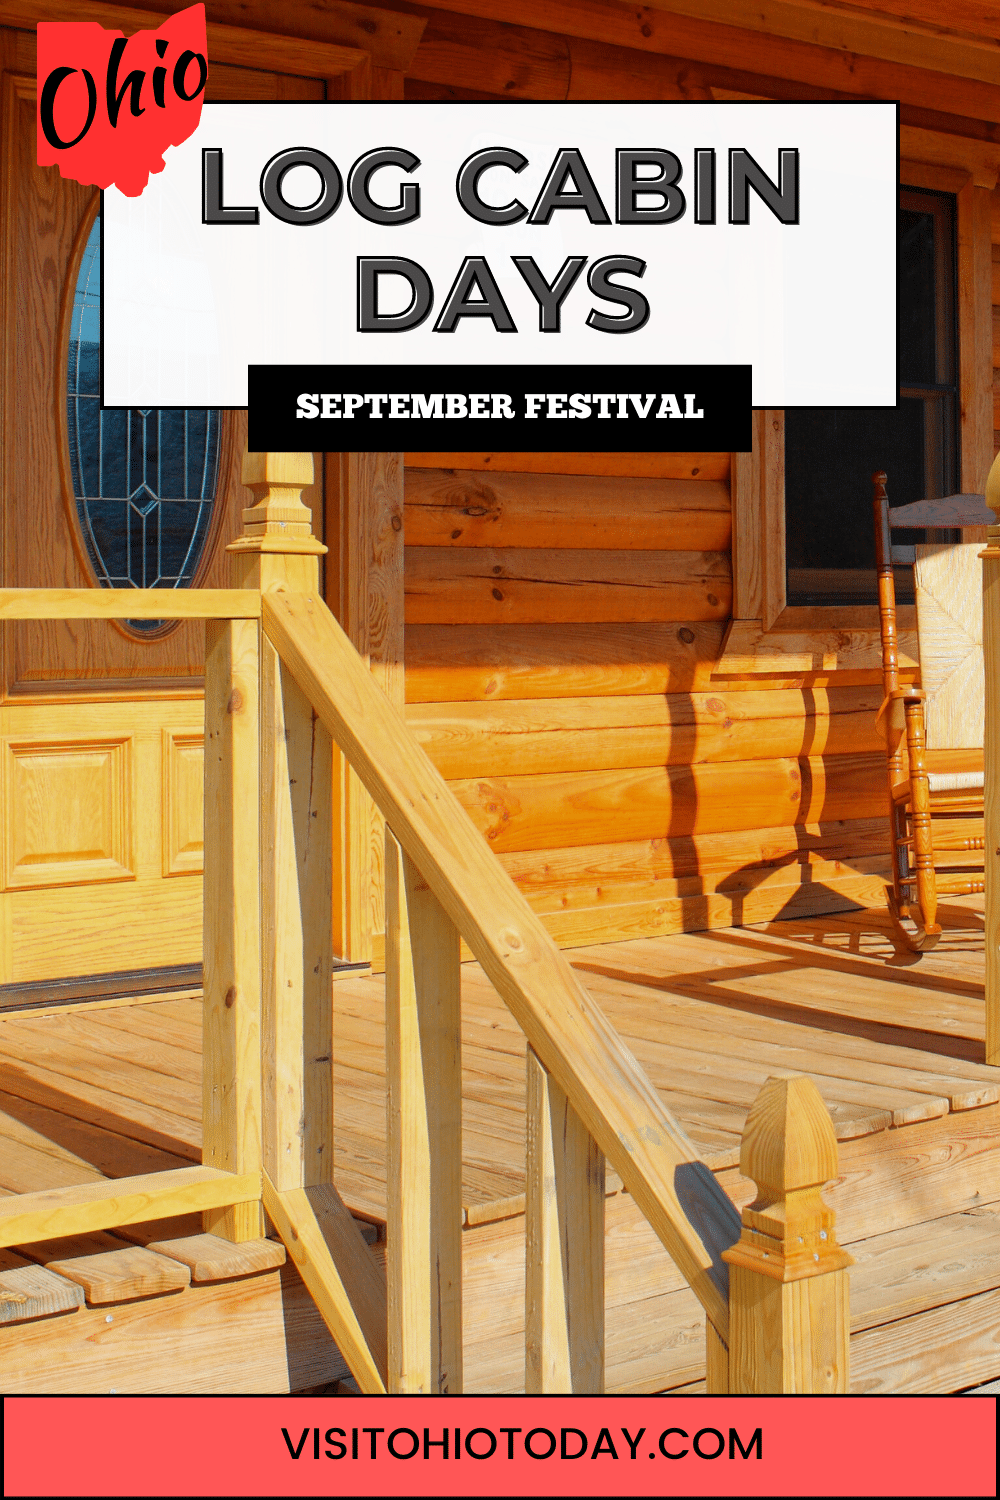 Log Cabin Days by Hochstetler Log Homes is a rustic and Amish-themed weekend event on Friday 15th and Saturday 16th September 2023.